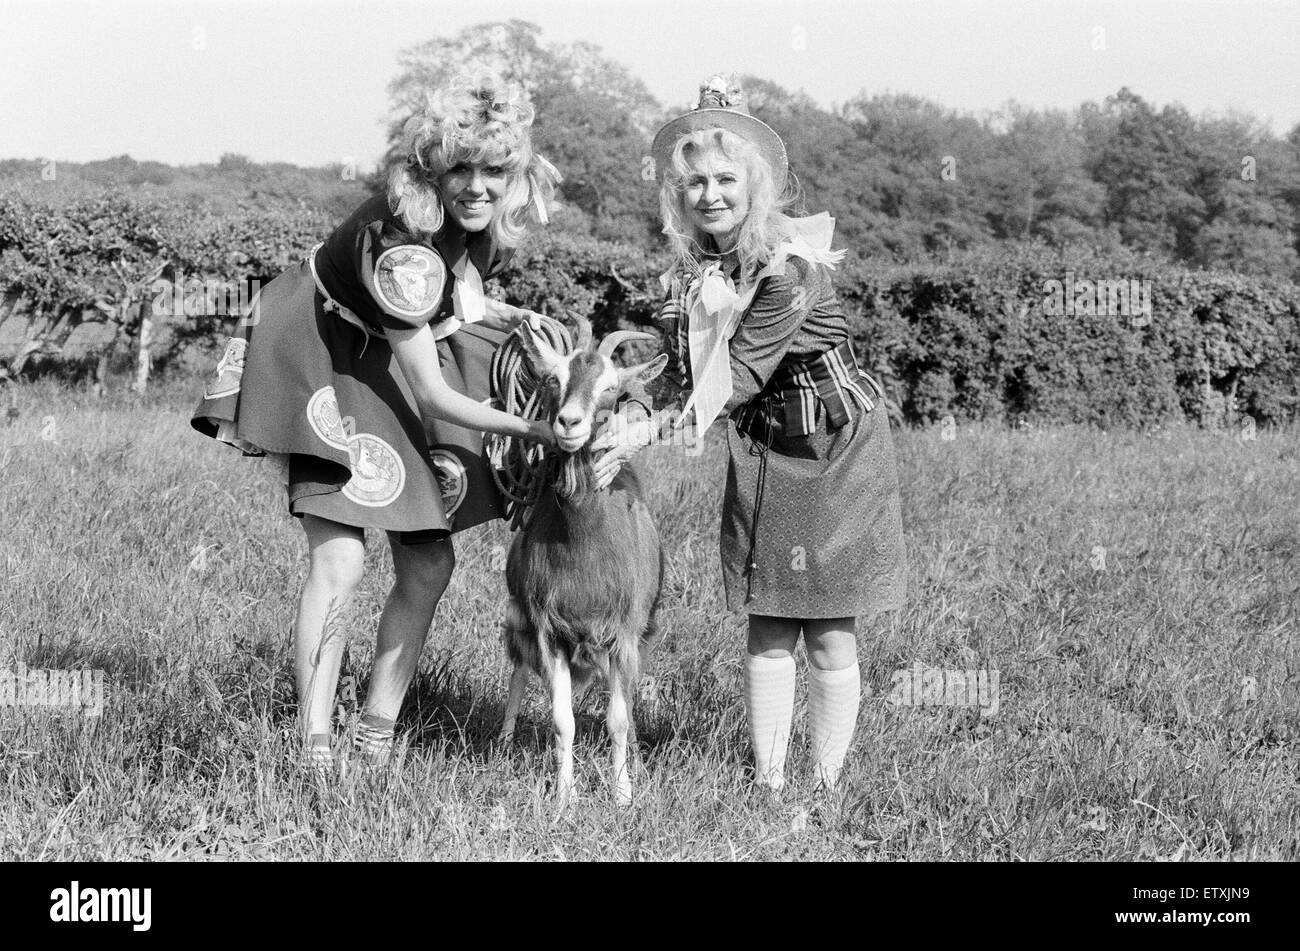 Rentaghost, BBC Childrens Television Programme.  Cast pictured filming outdoor scenes with new character, Nanny the Goat, Barnham, Bucks, 8th June 1983. Actors, Sue Nicholls, and Molly Weir. Stock Photo